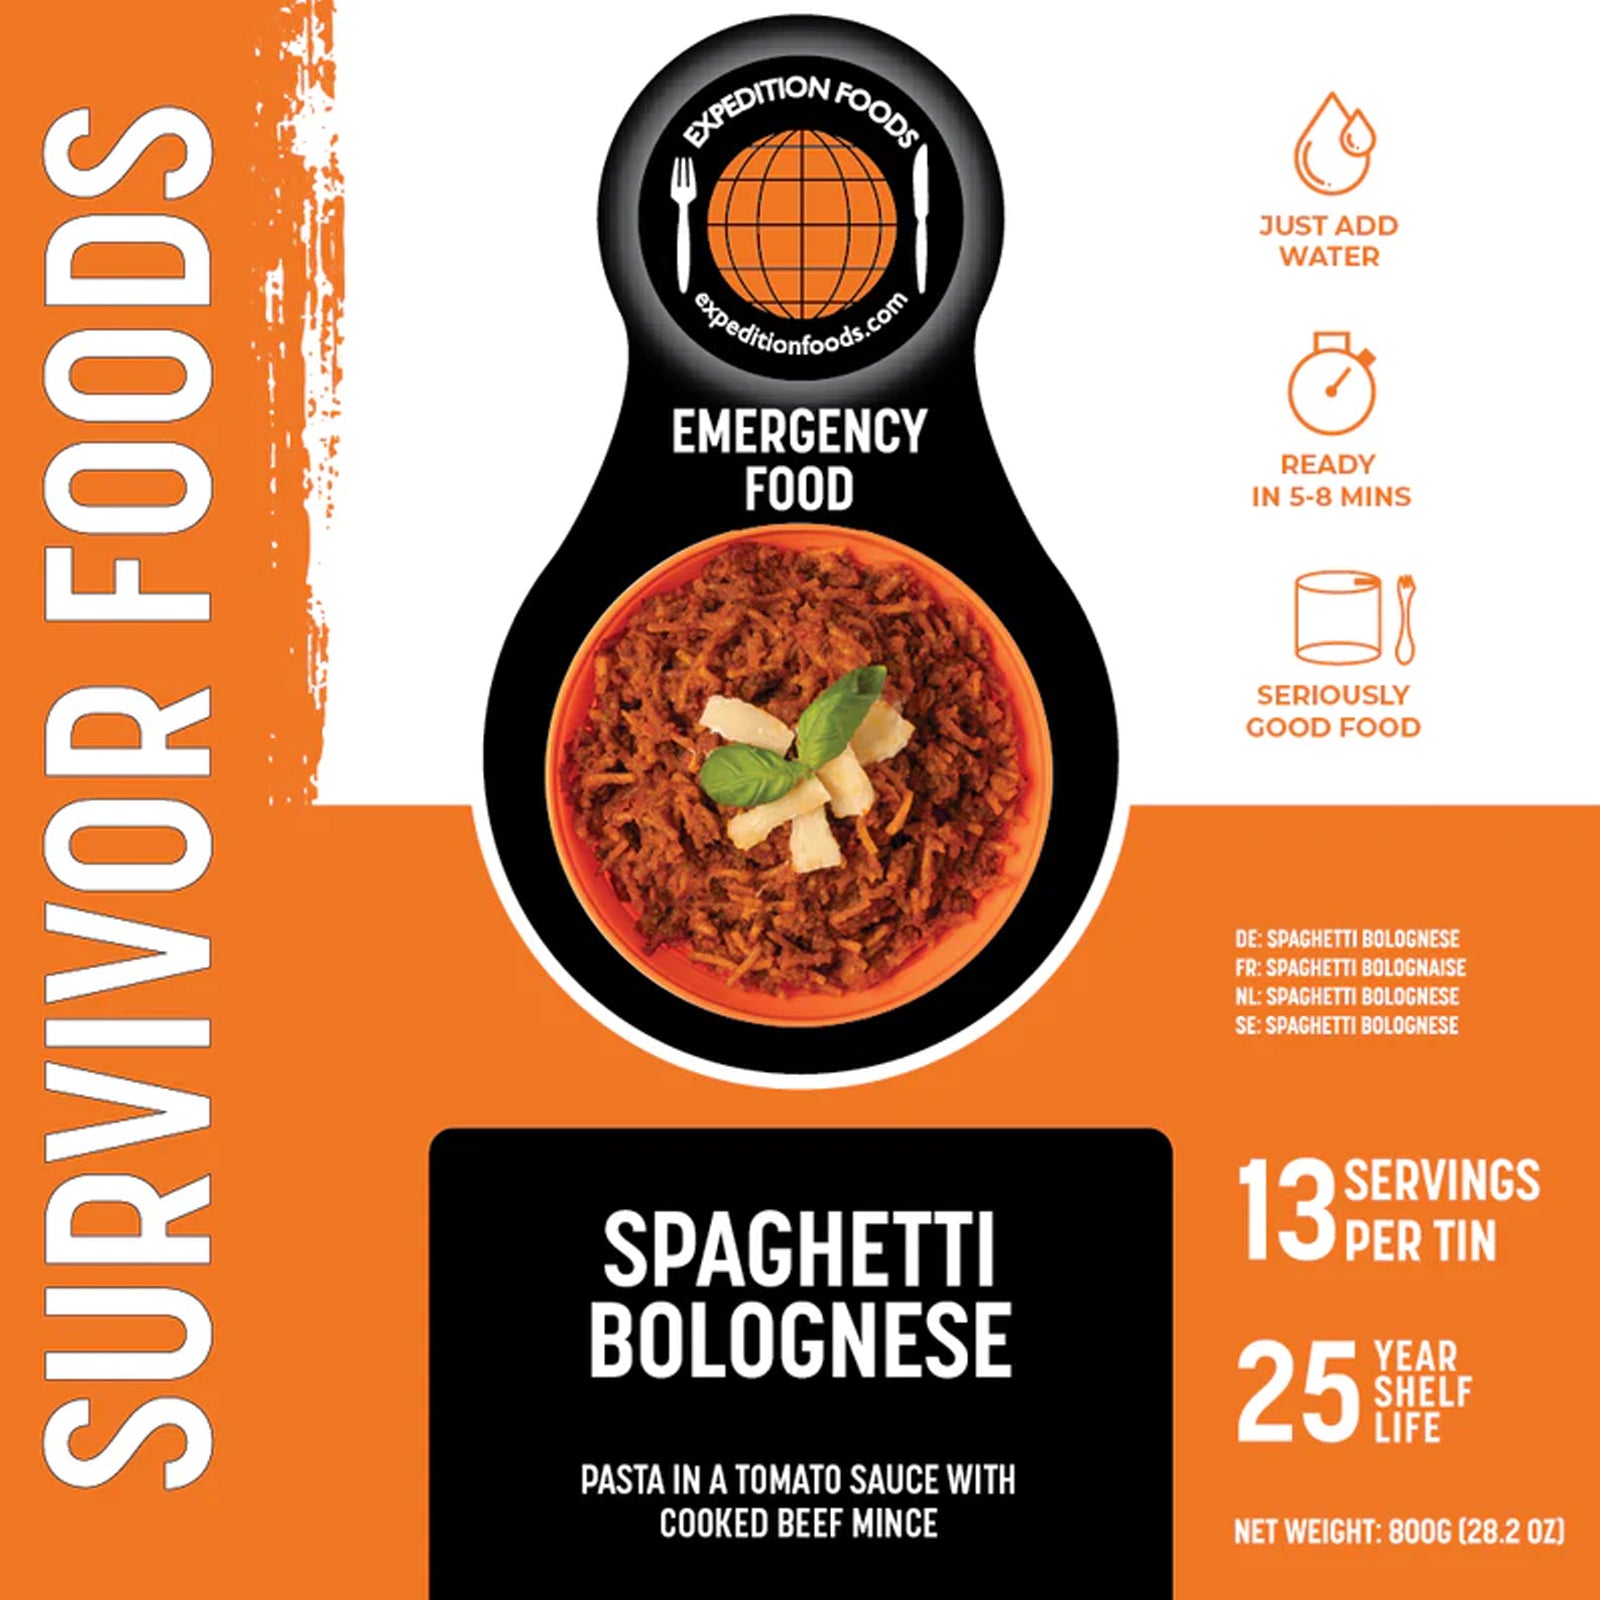 Expedition Foods Spaghetti Bolognese Meal Details